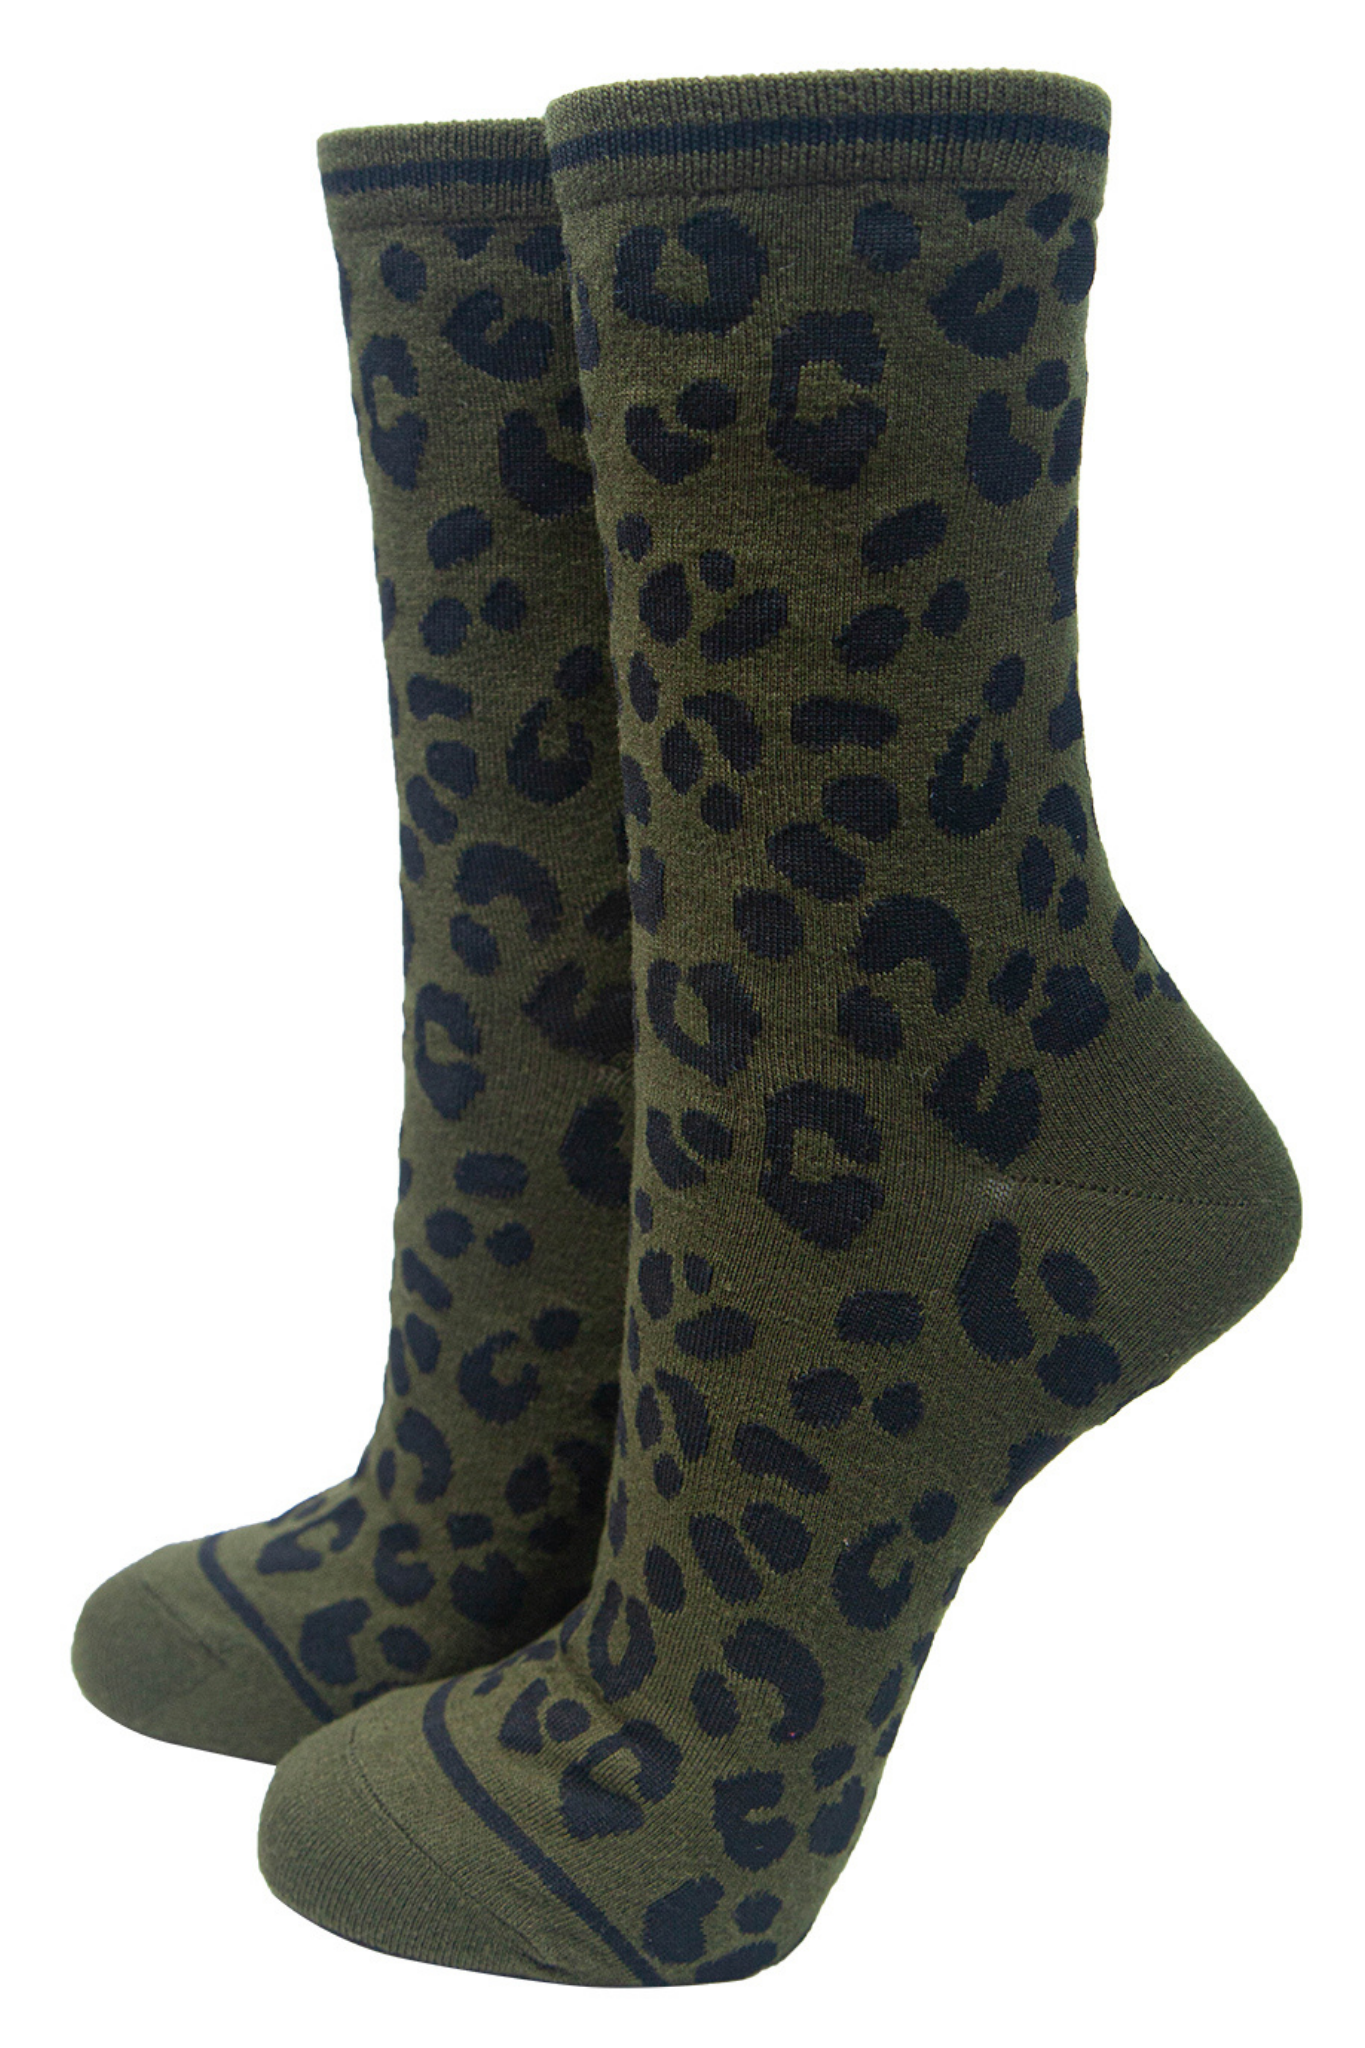 green ankle socks with an all over black animal print